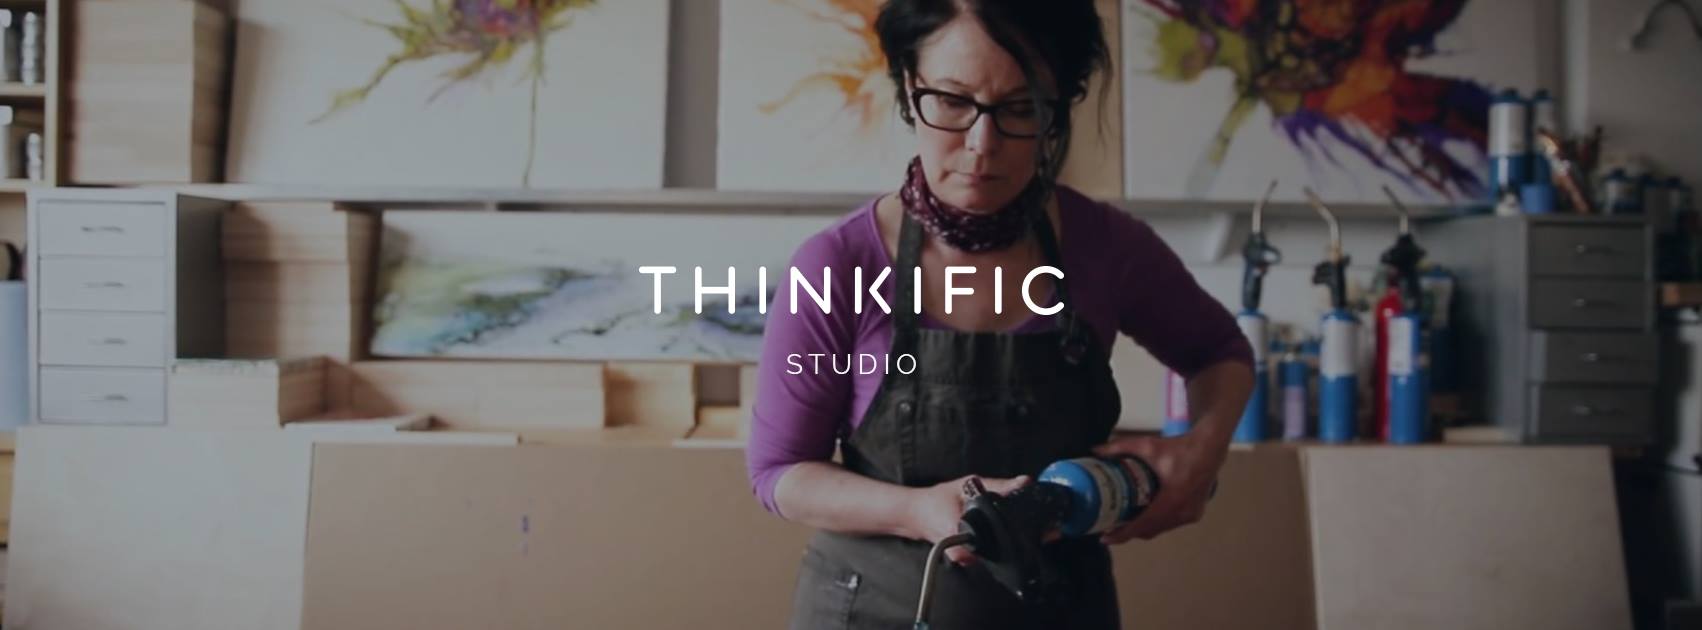 Thinkific Facebook Group to Stay Current in Online Course Industry